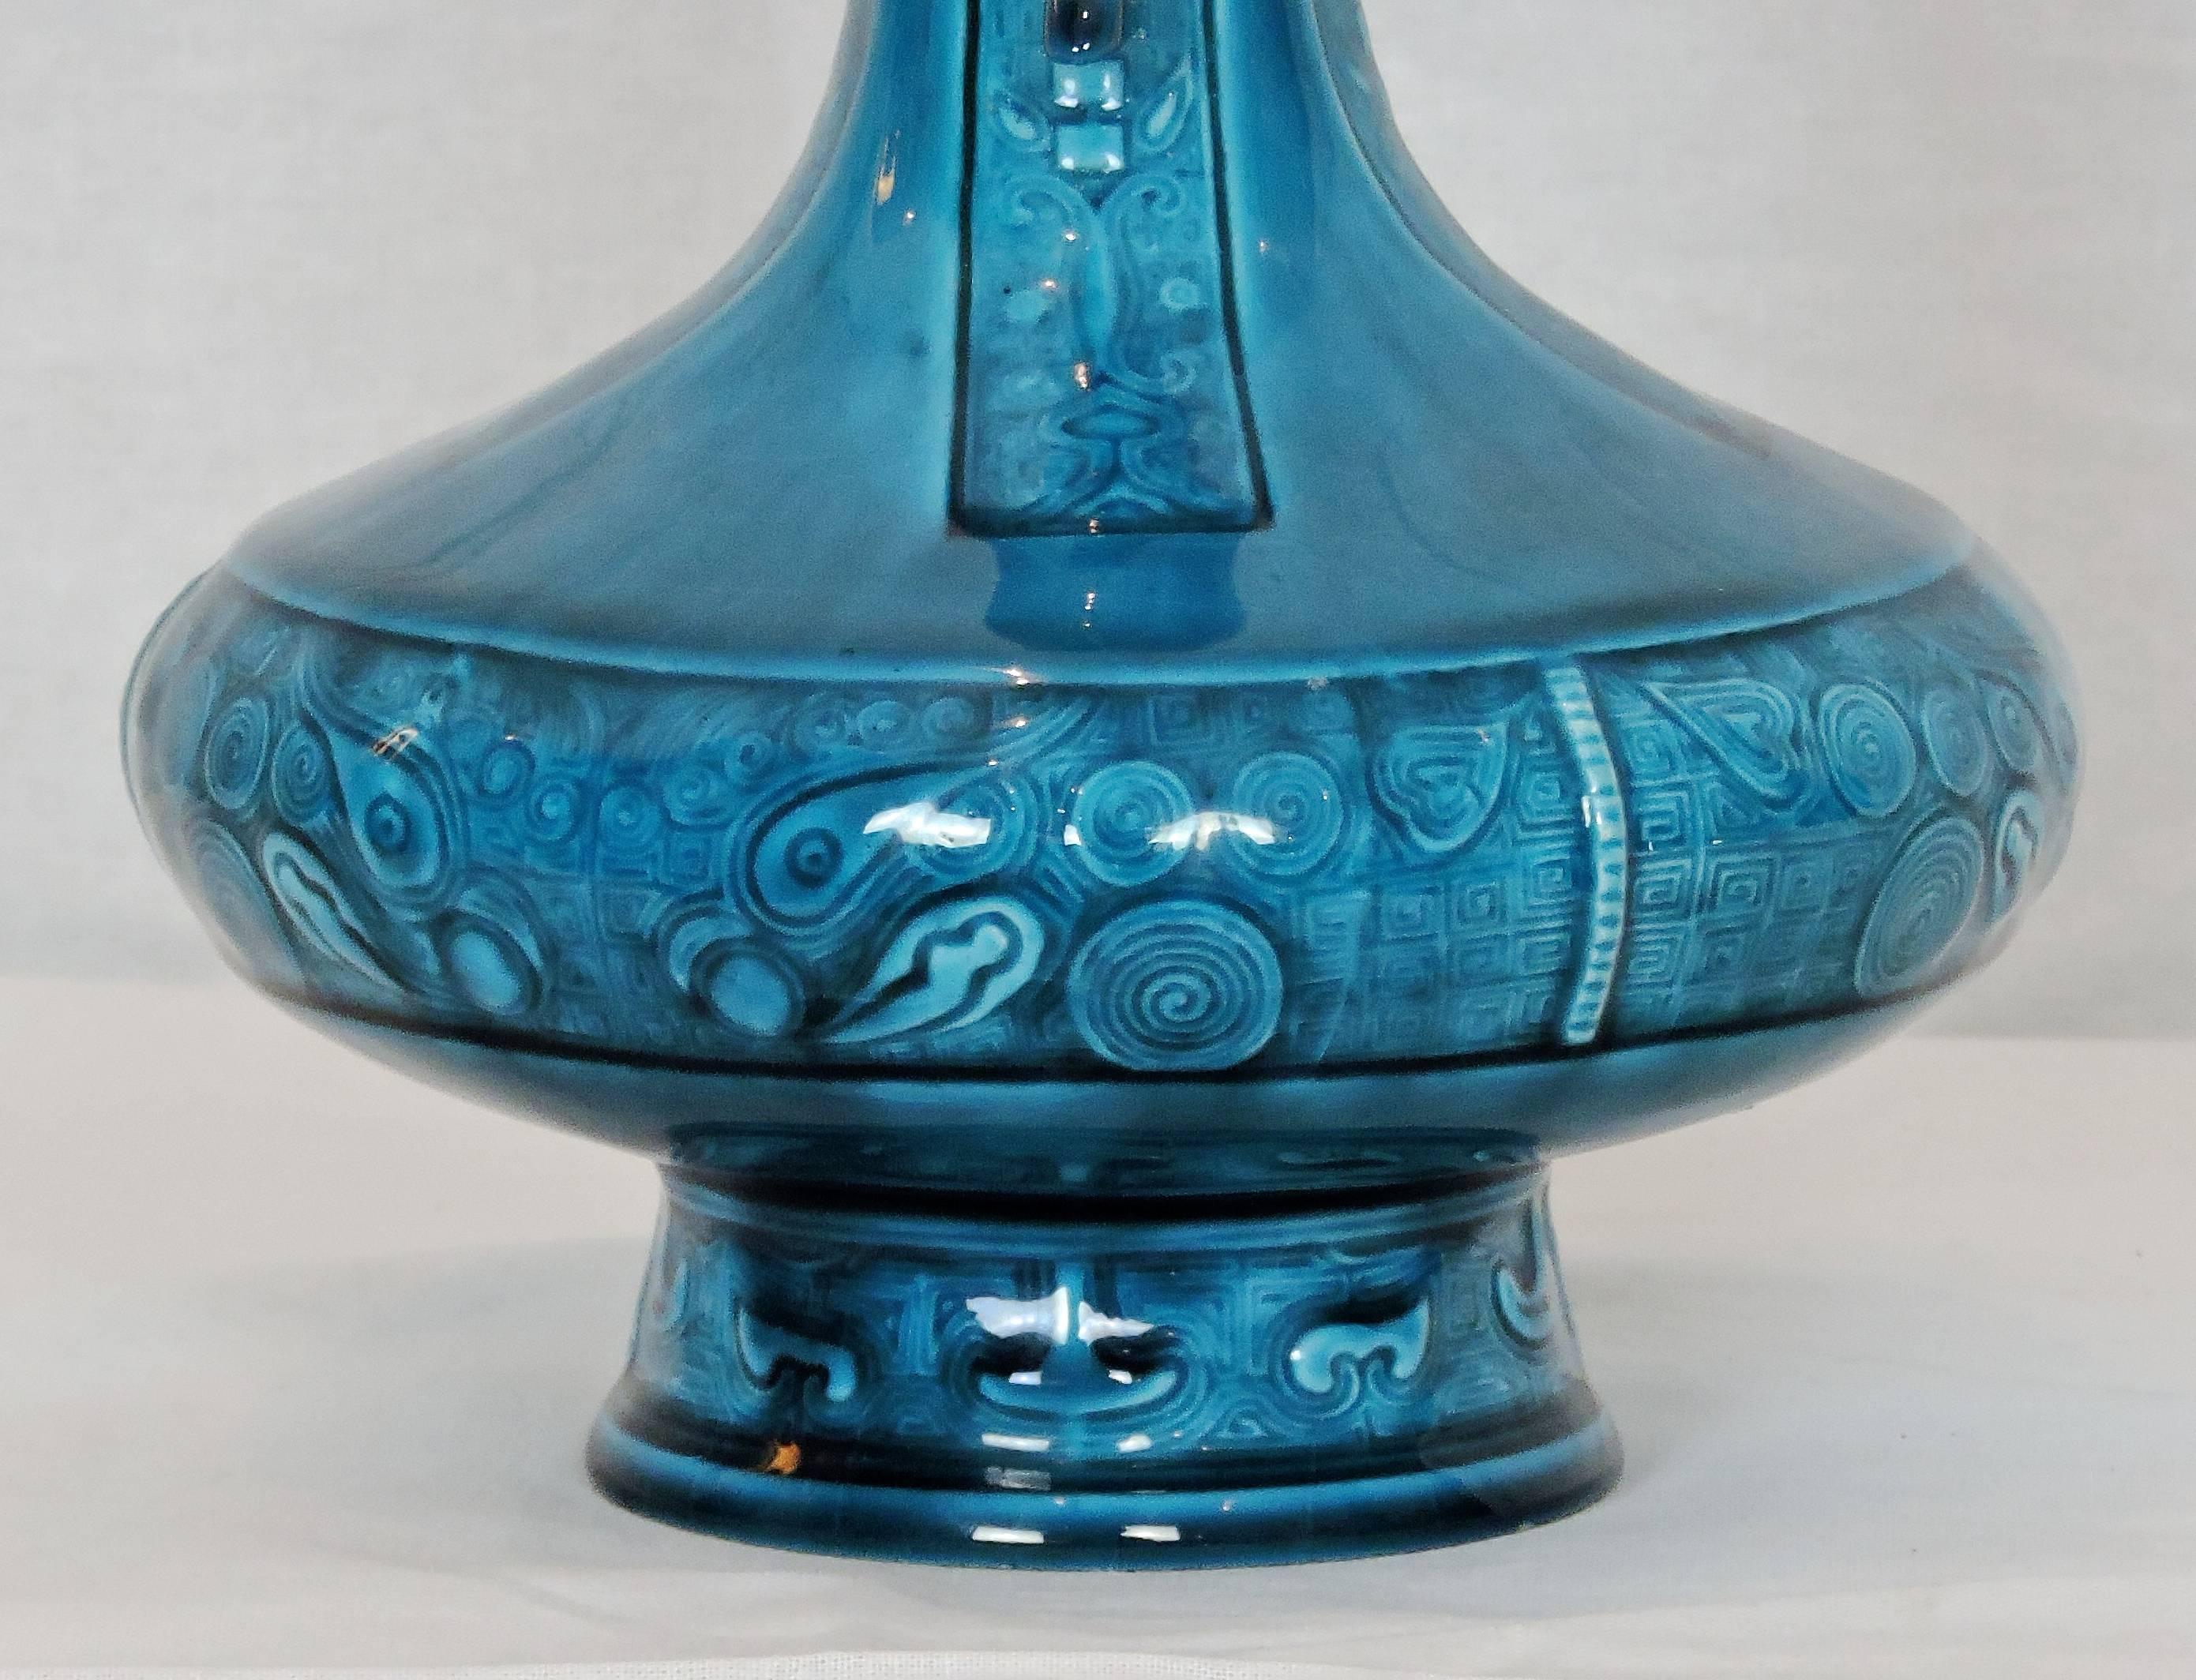 Enameled Theodore Deck Faience Persian Blue Baluster Vase